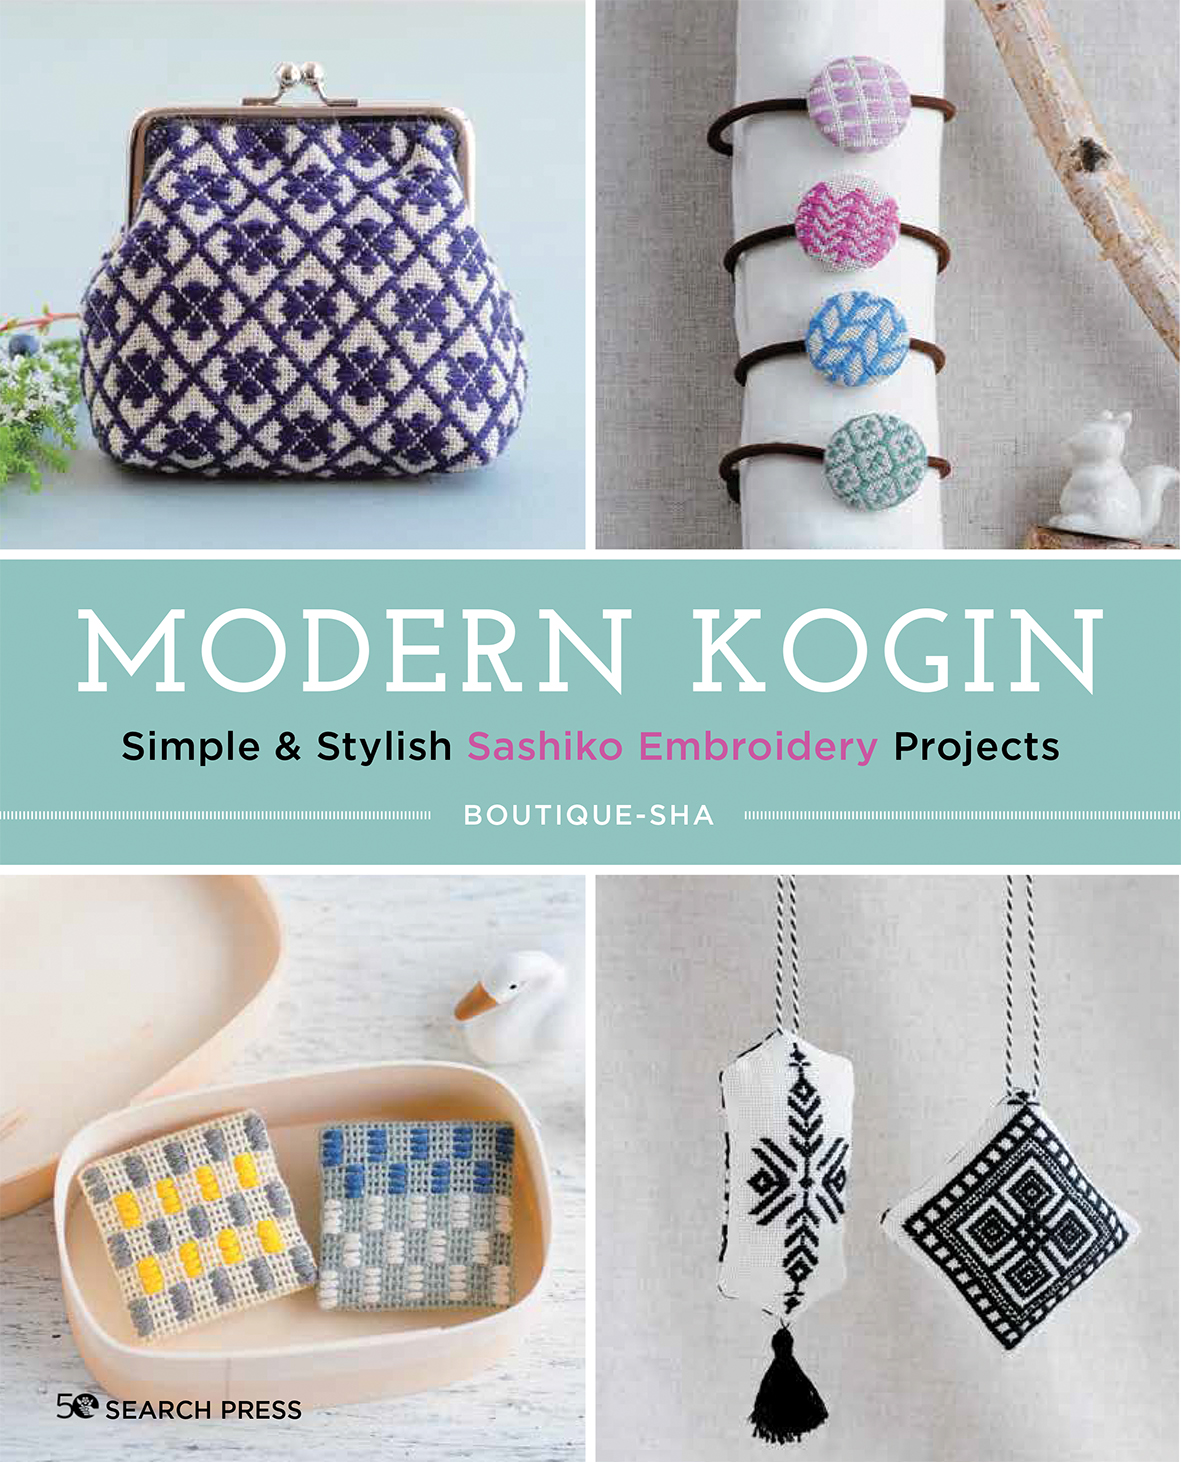 Modern Kogin: Simple & Stylish Sashiko Embroidery Projects by Boutique-Sha